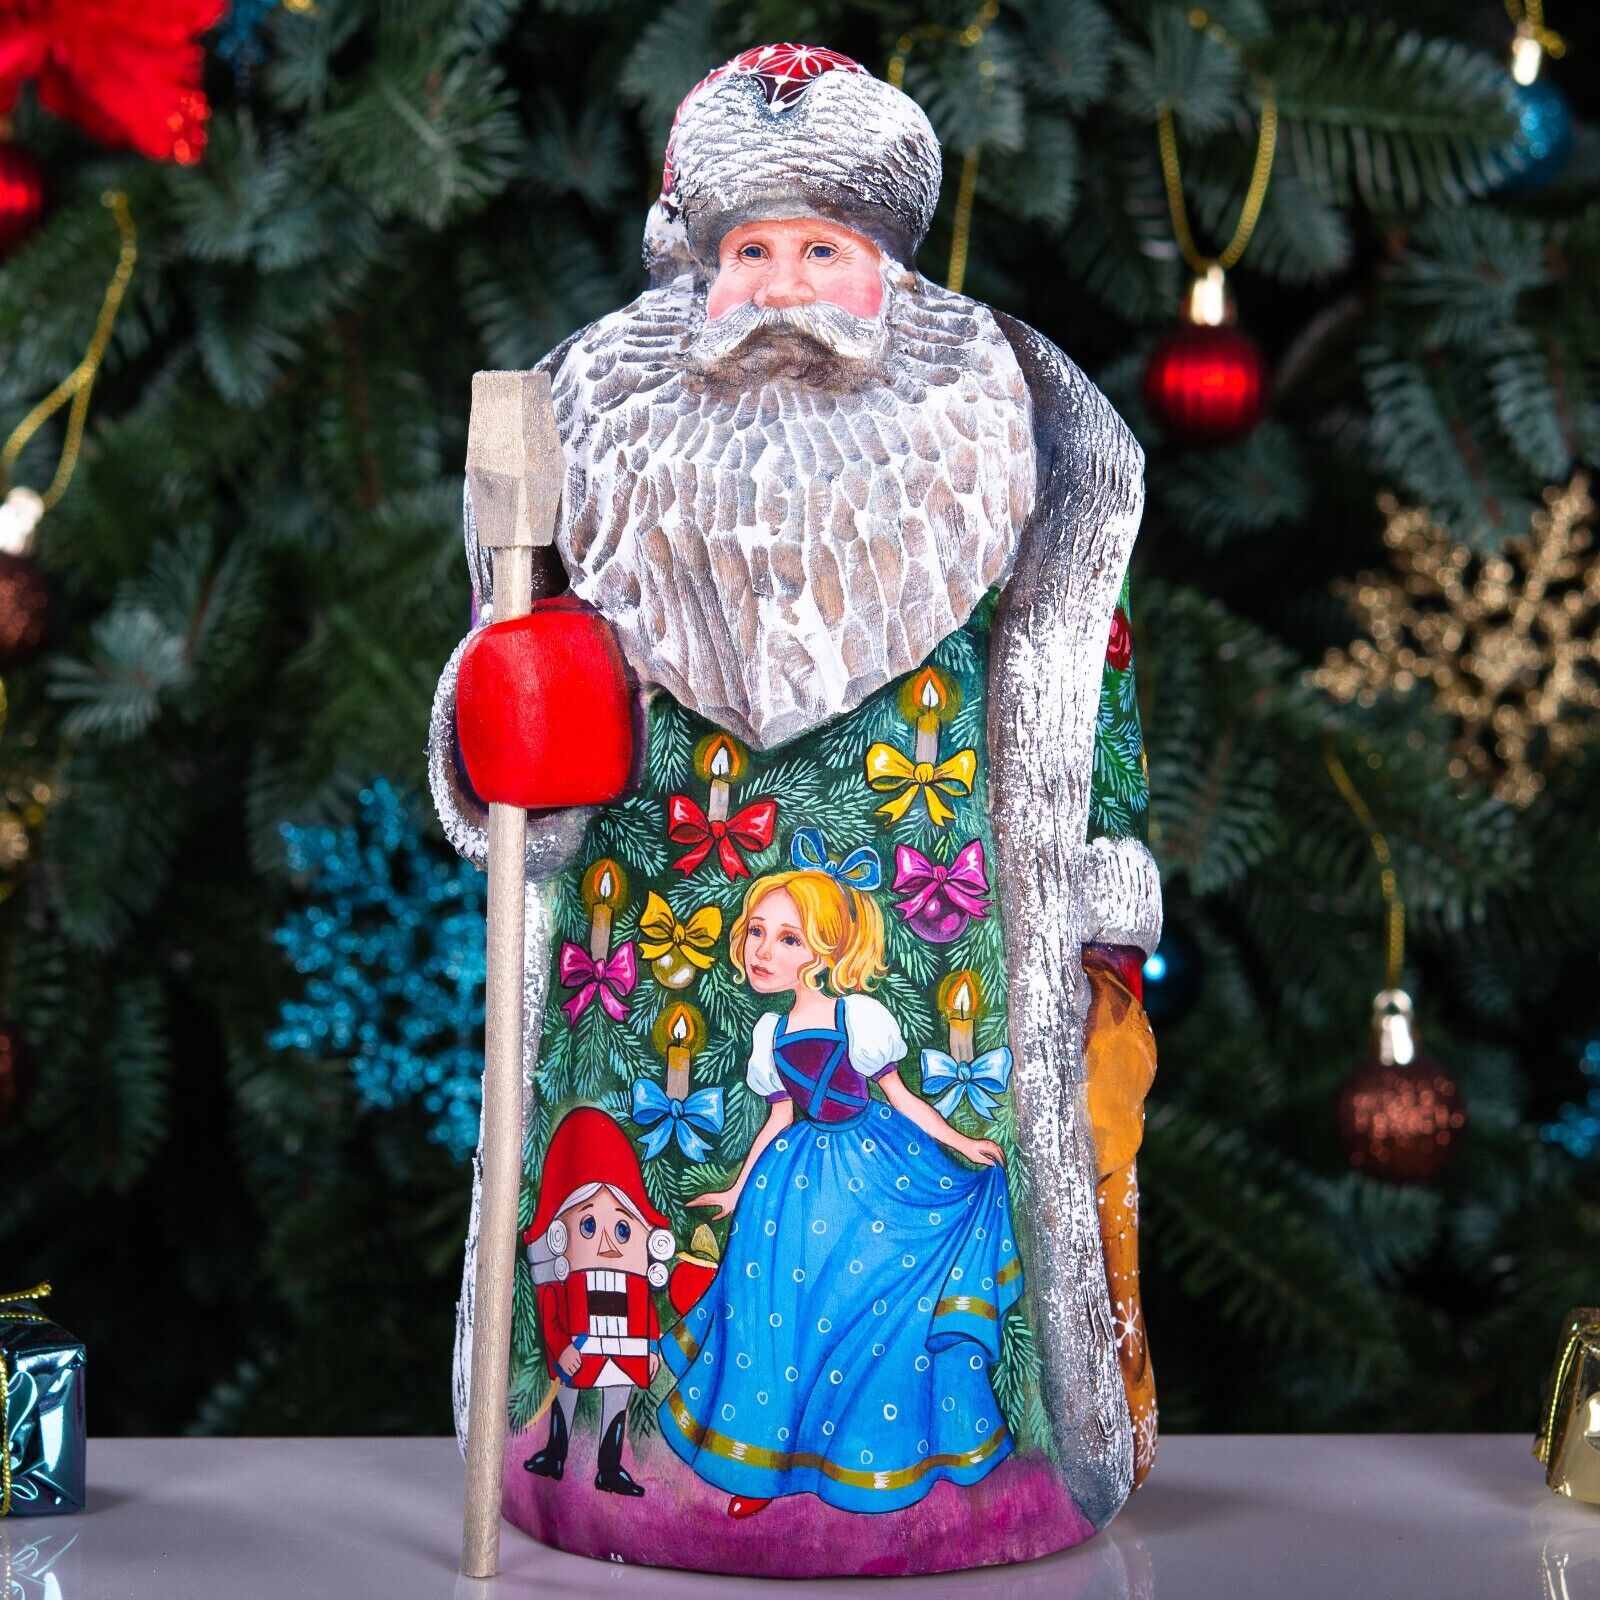 Wooden Hand Carved russian Santa Claus figurine, hand painted Nutcracker Scene